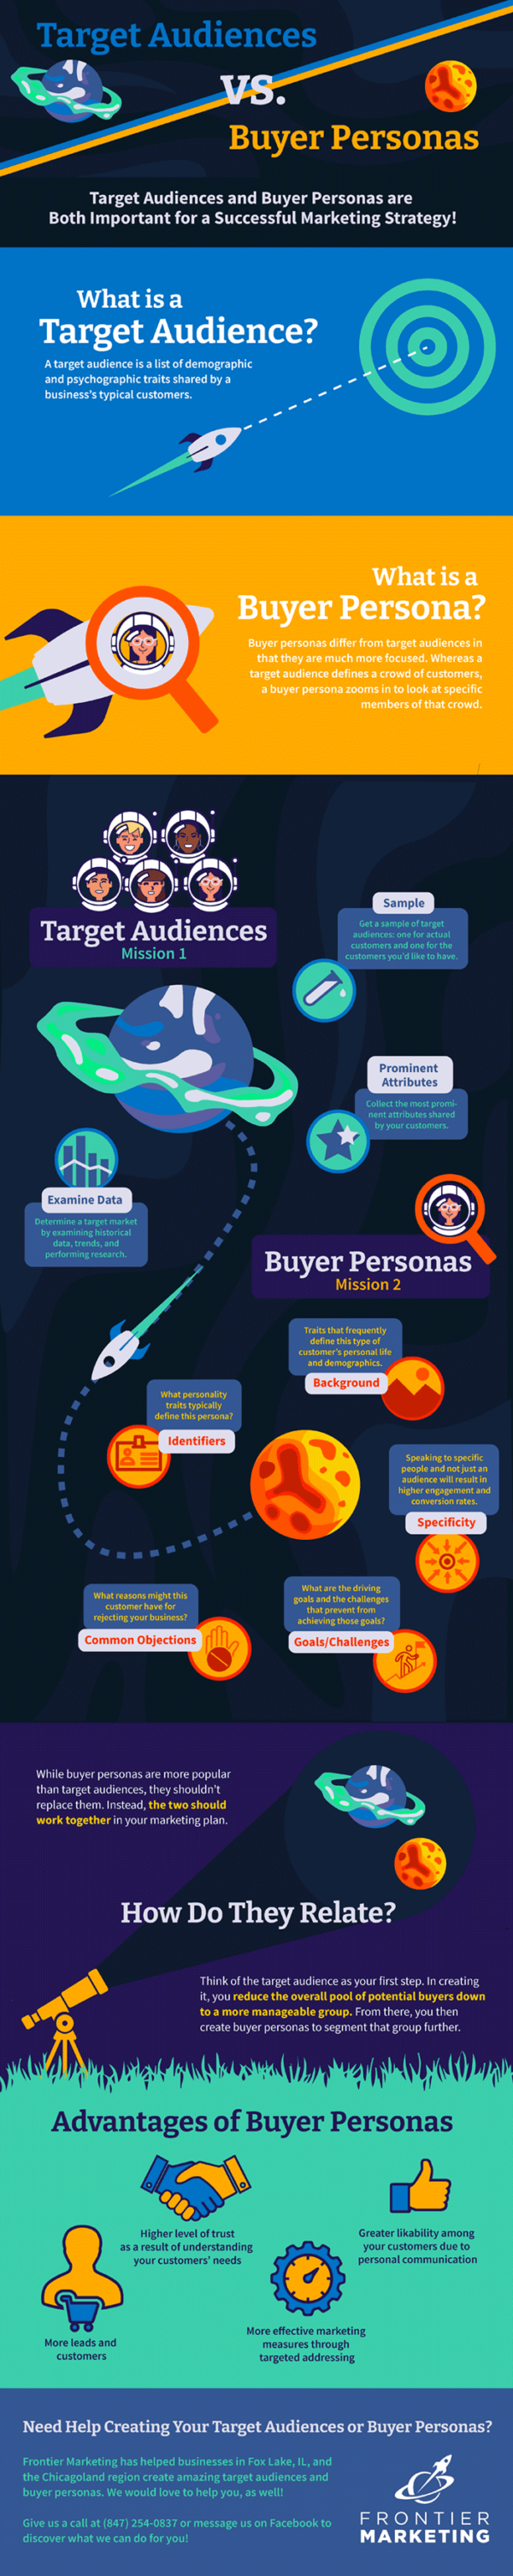 An infographic about target audience vs. buyer persona